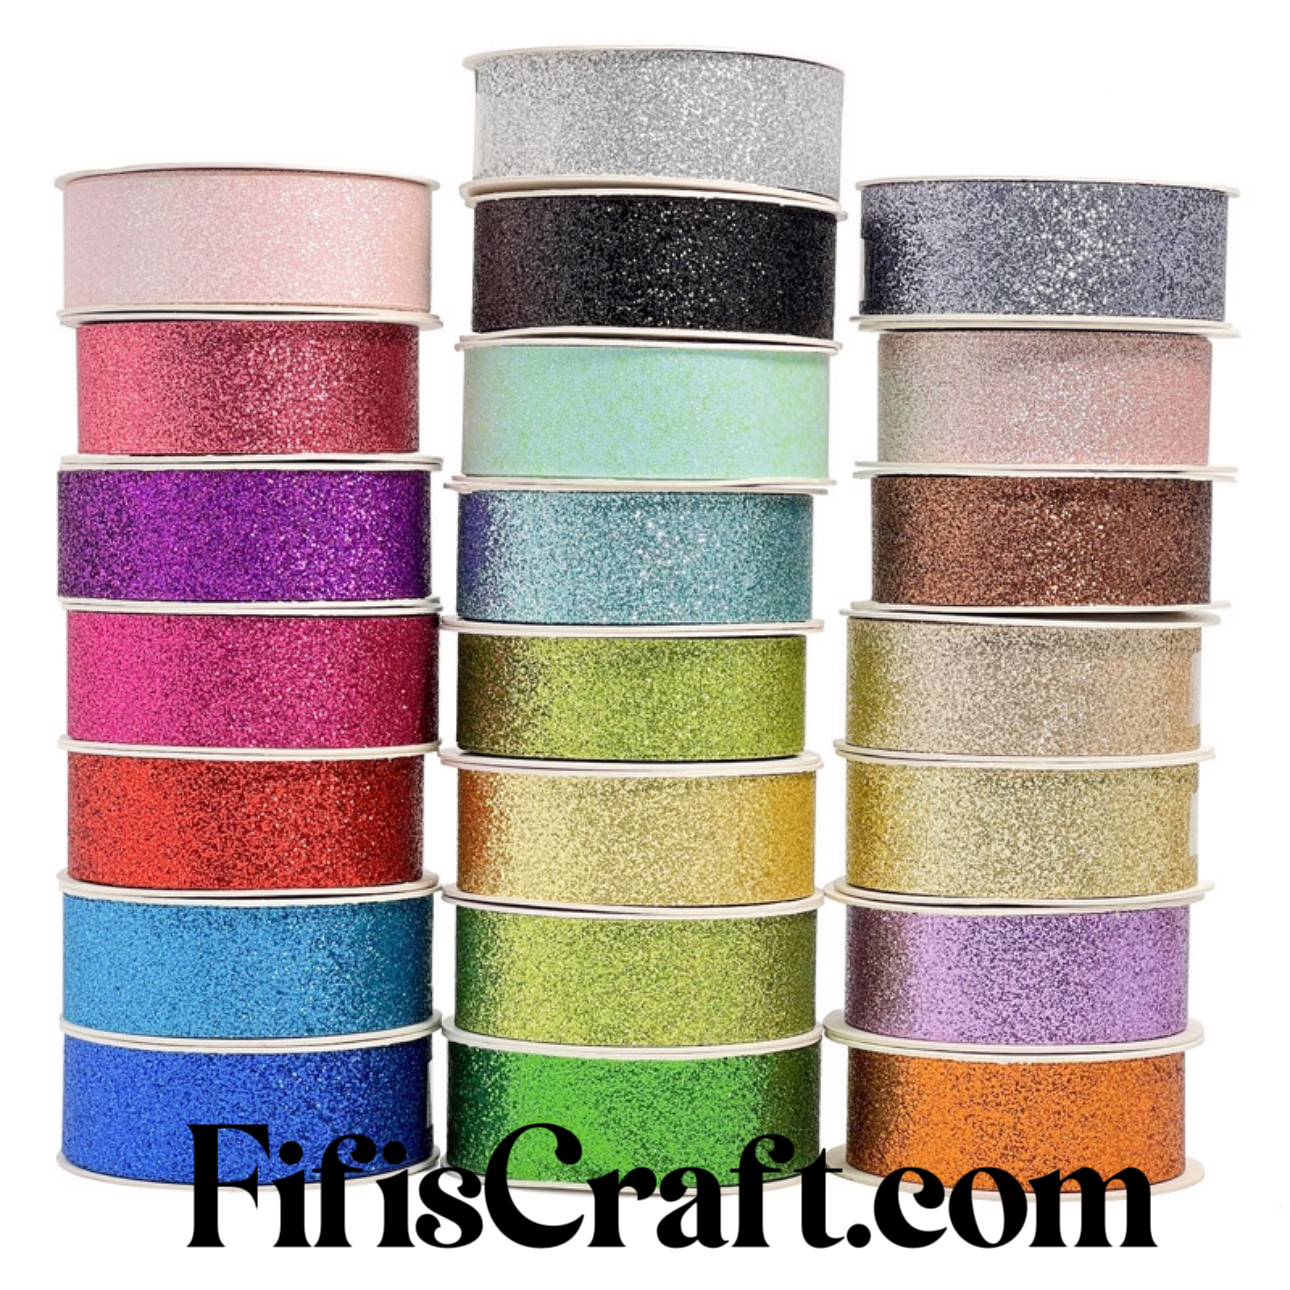 (Copy) 25 Yards Nylon Metallic Glitter Ribbon 7/8-inch, 8 colors, immediate shipping from USA, for hair bow, party, wedding, scrap booking,